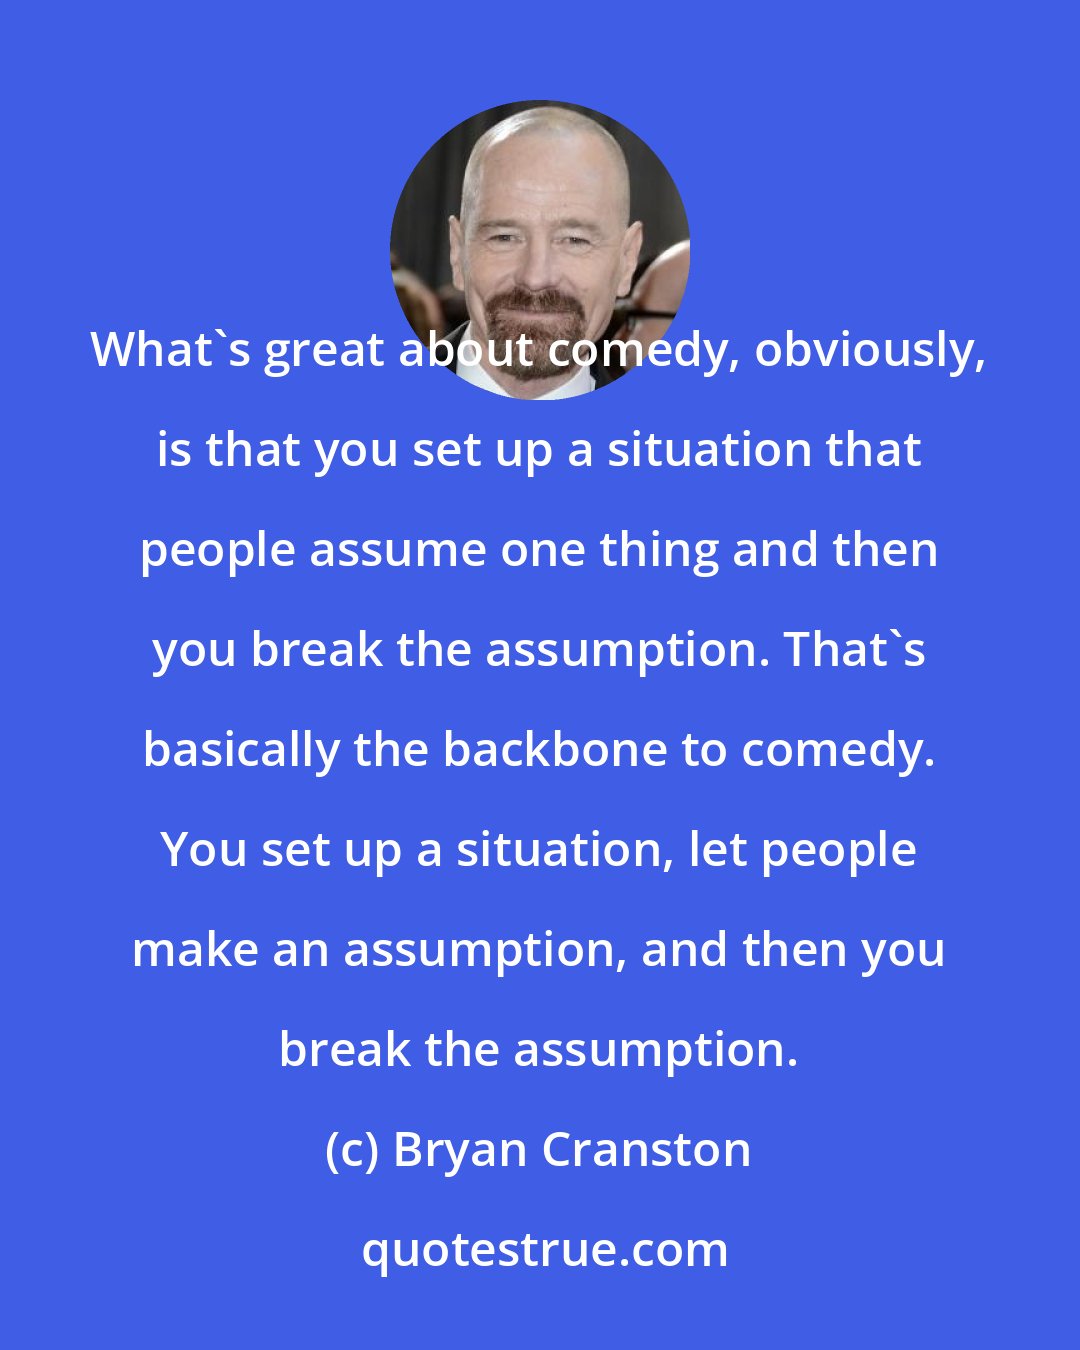 Bryan Cranston: What's great about comedy, obviously, is that you set up a situation that people assume one thing and then you break the assumption. That's basically the backbone to comedy. You set up a situation, let people make an assumption, and then you break the assumption.